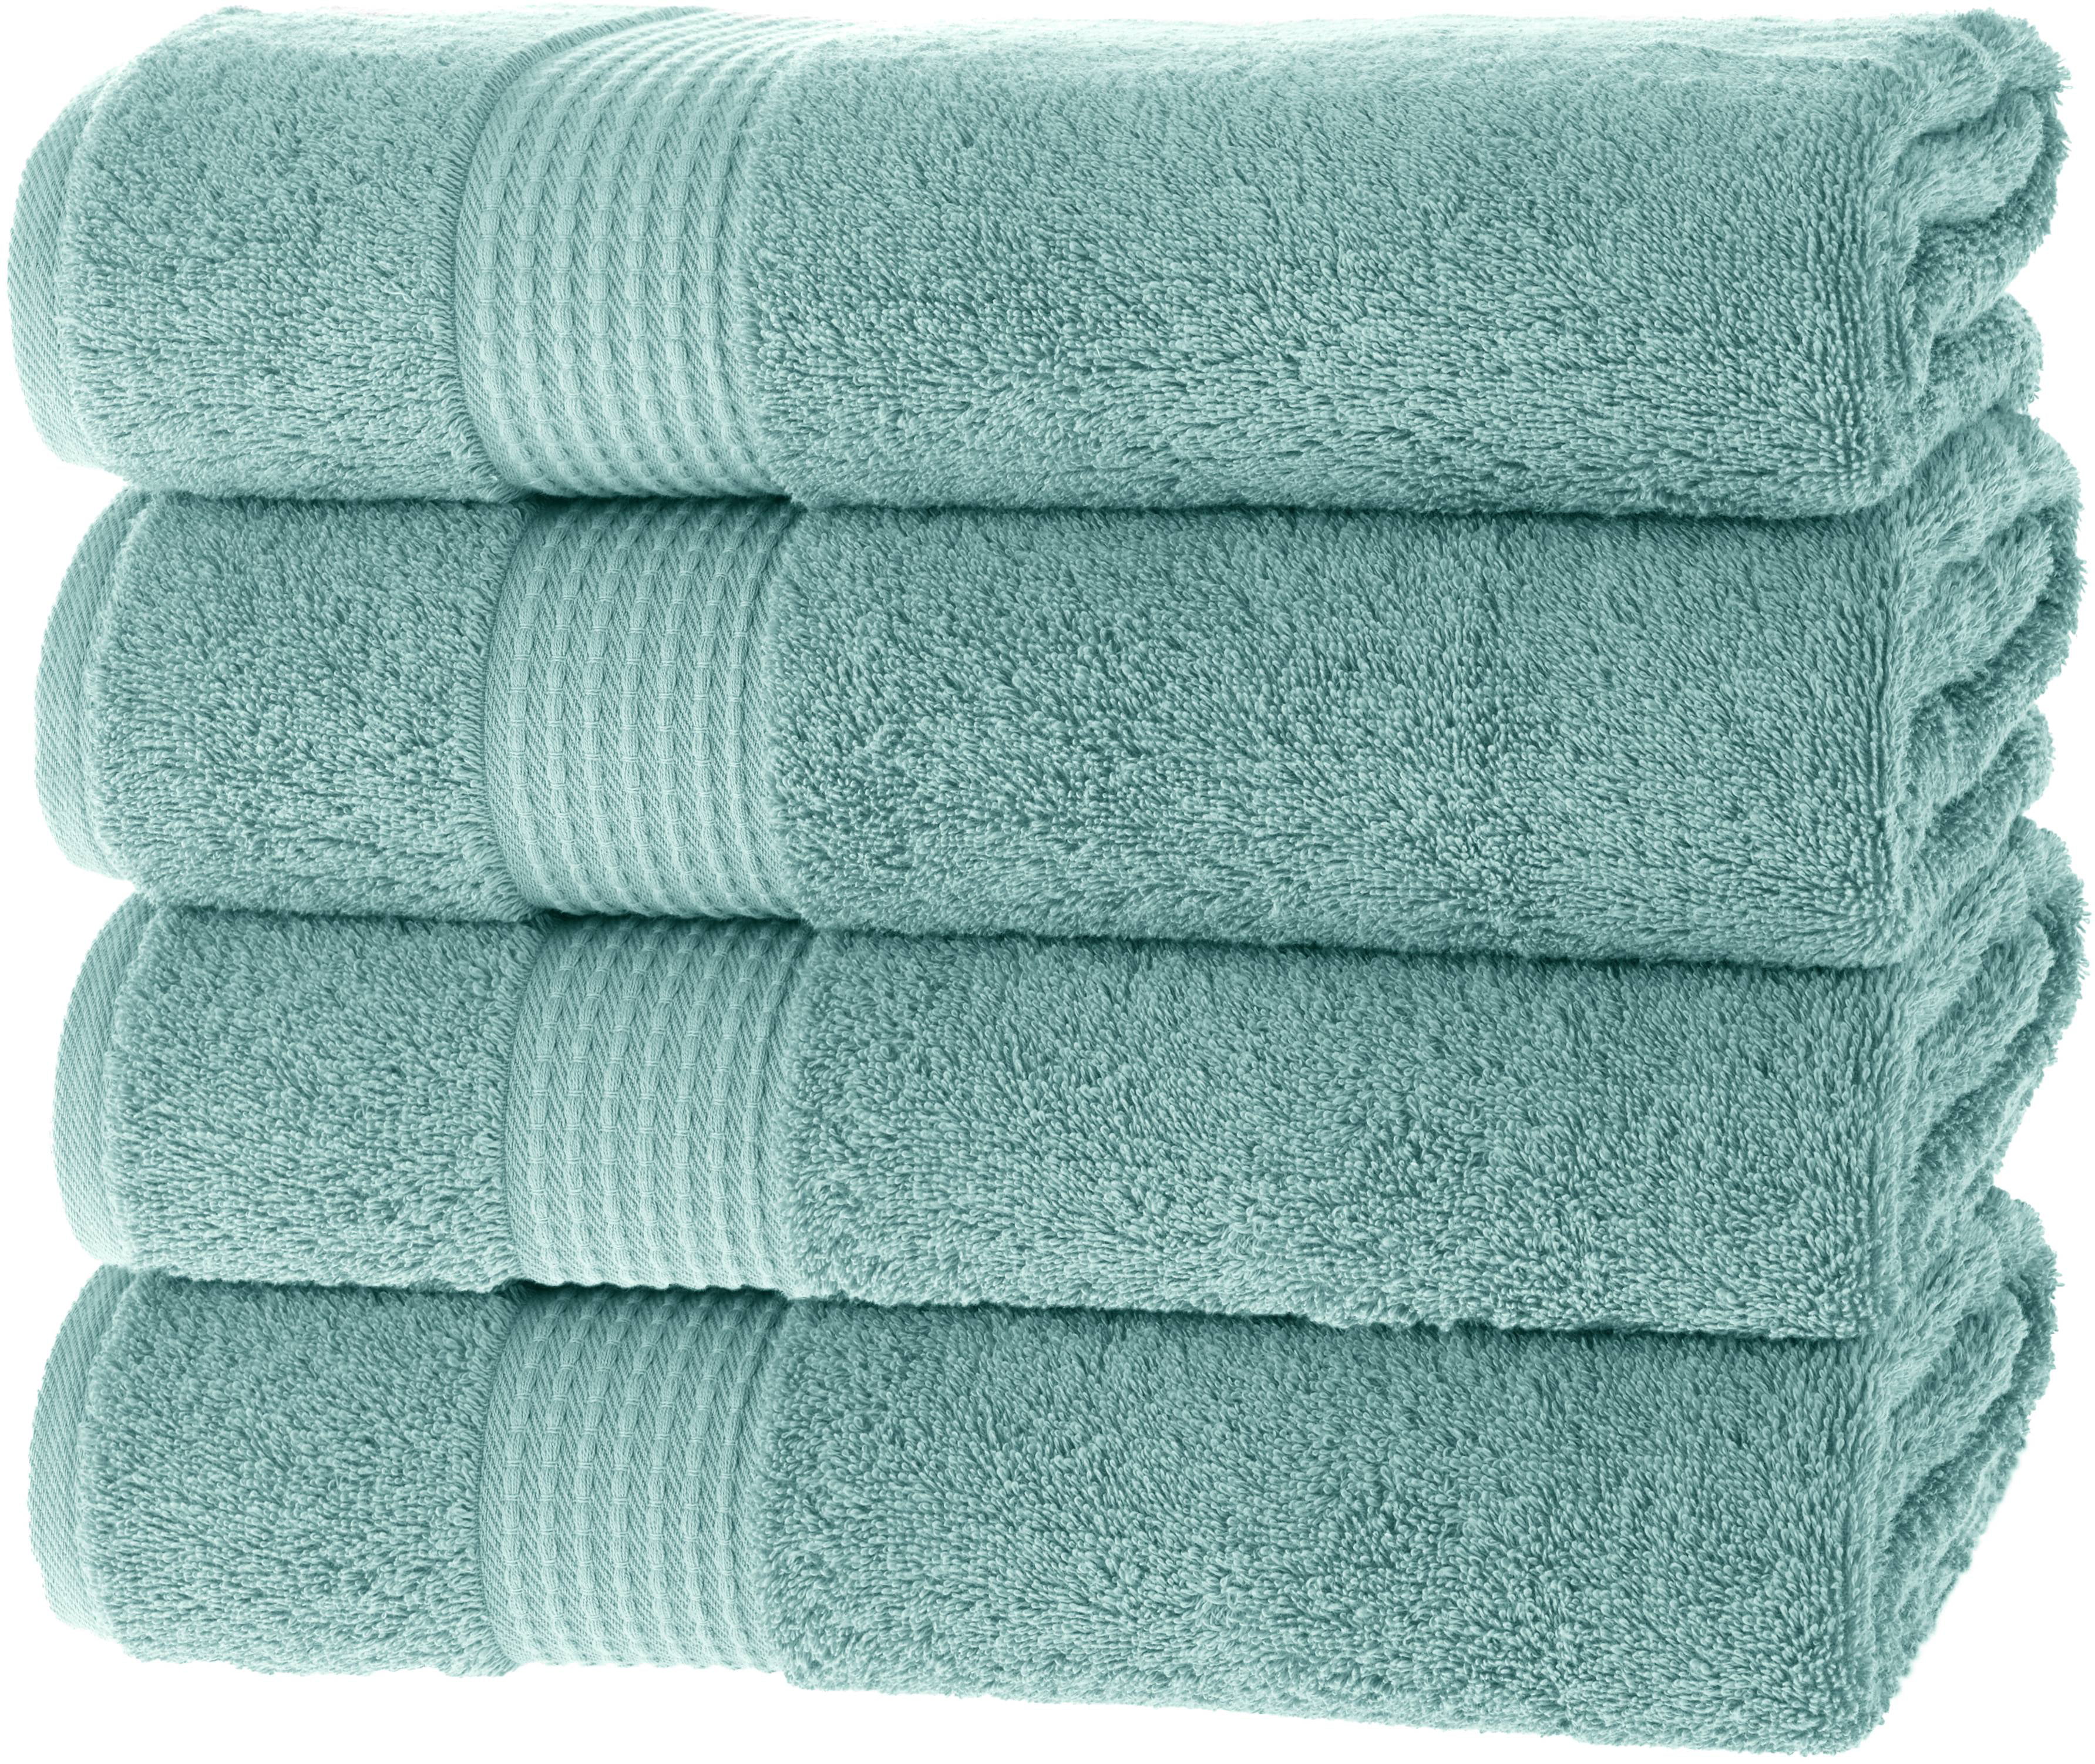  Maura Basics Performance Wash Cloths with Hanging Loop. 13”x13”  American Standard Towel Size. Soft, Durable, Long Lasting and Absorbent